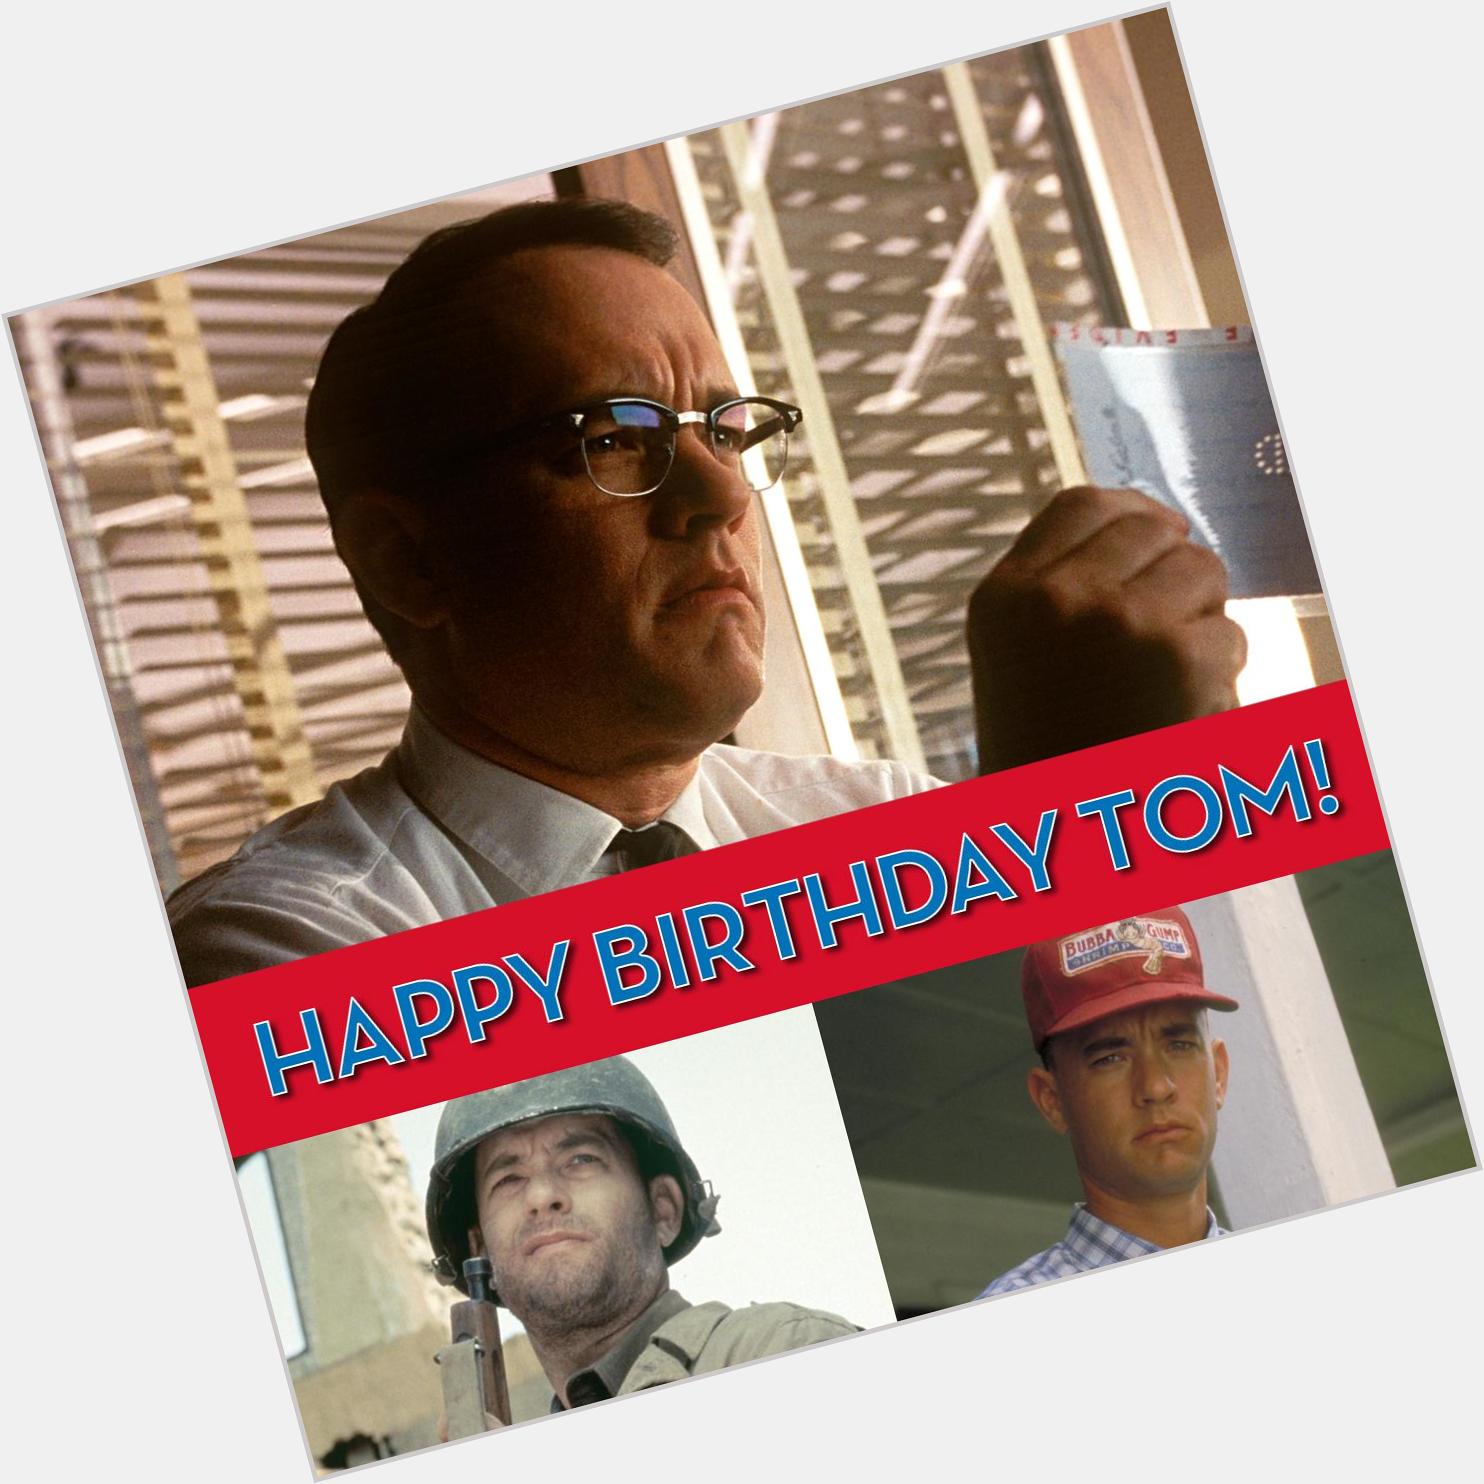 Happy Birthday to Tom Hanks, the star of Paramount films Catch Me If You Can, Forrest Gump and Saving Private Ryan. 